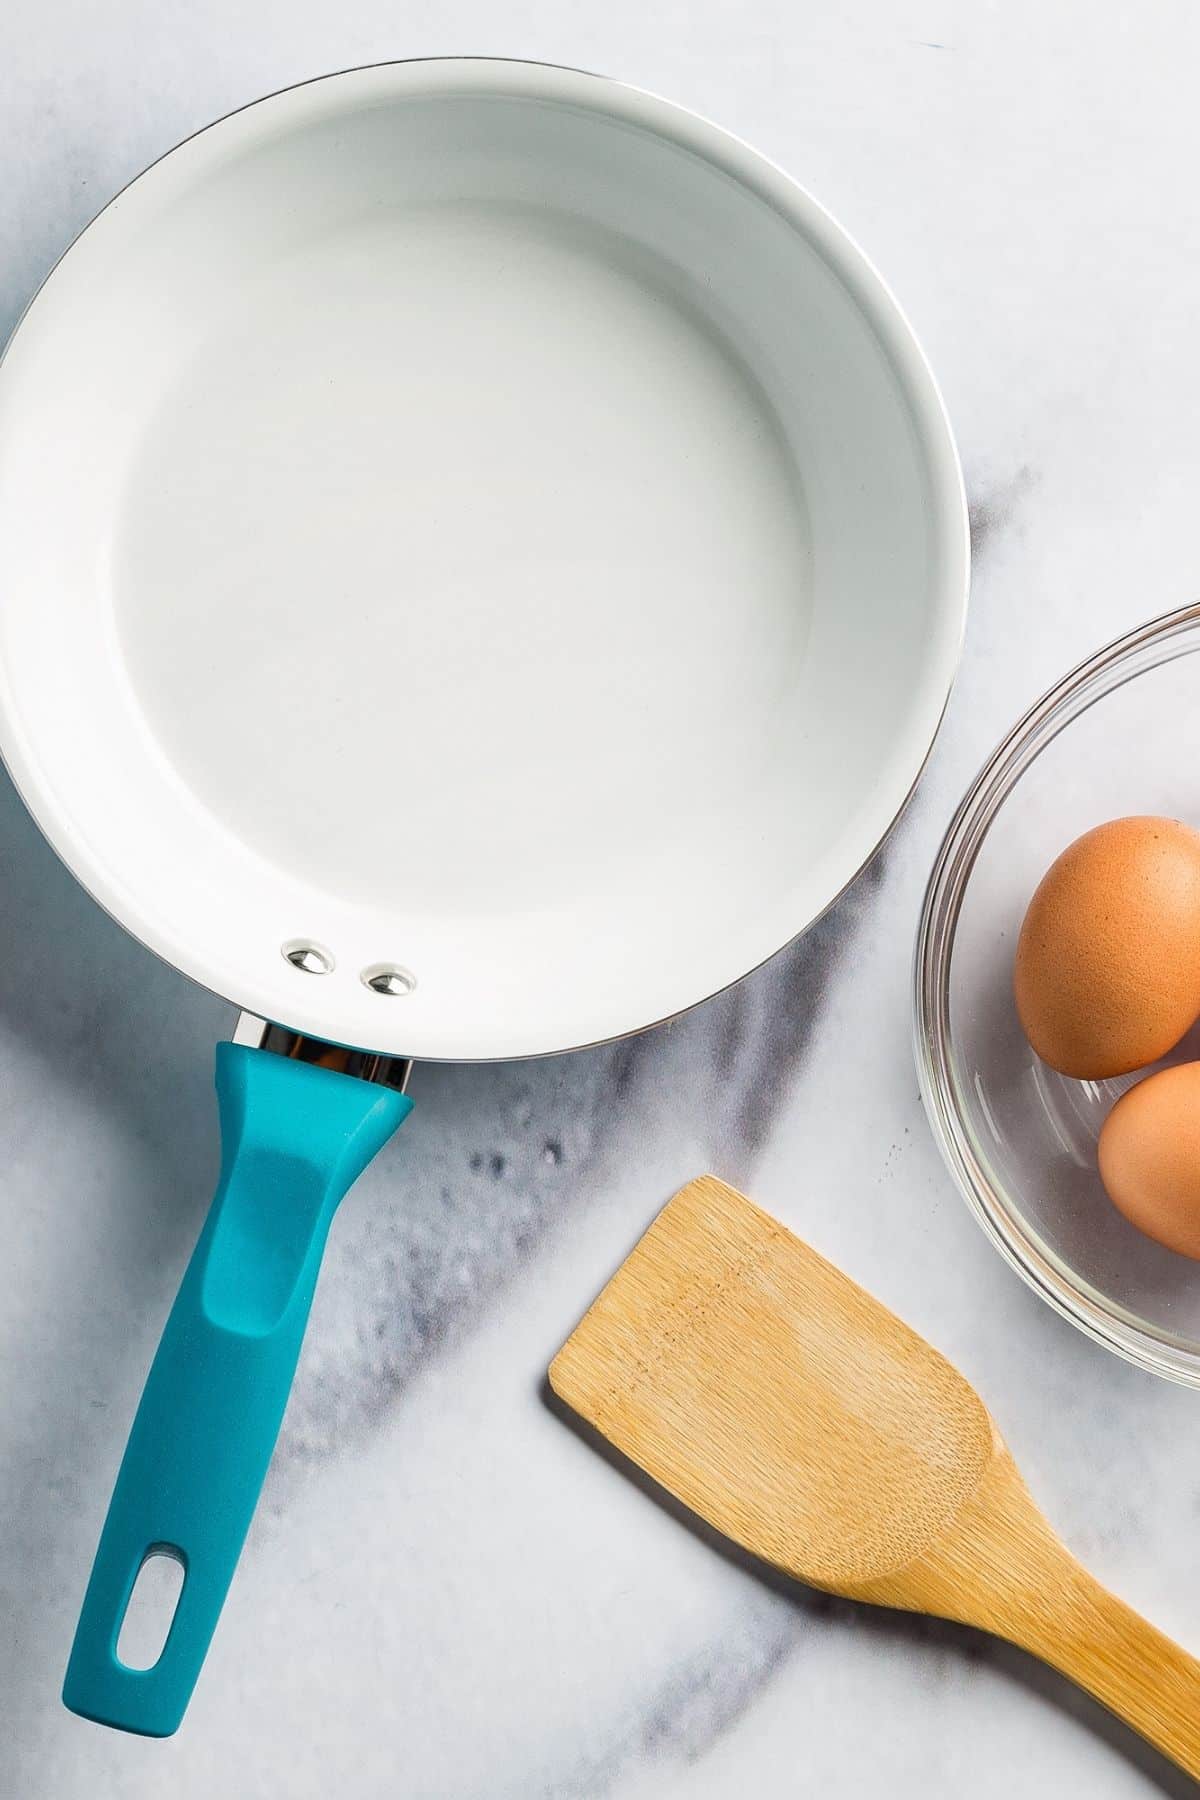 https://www.cleaneatingkitchen.com/wp-content/uploads/2021/02/ceramic-skillet-with-eggs.jpg